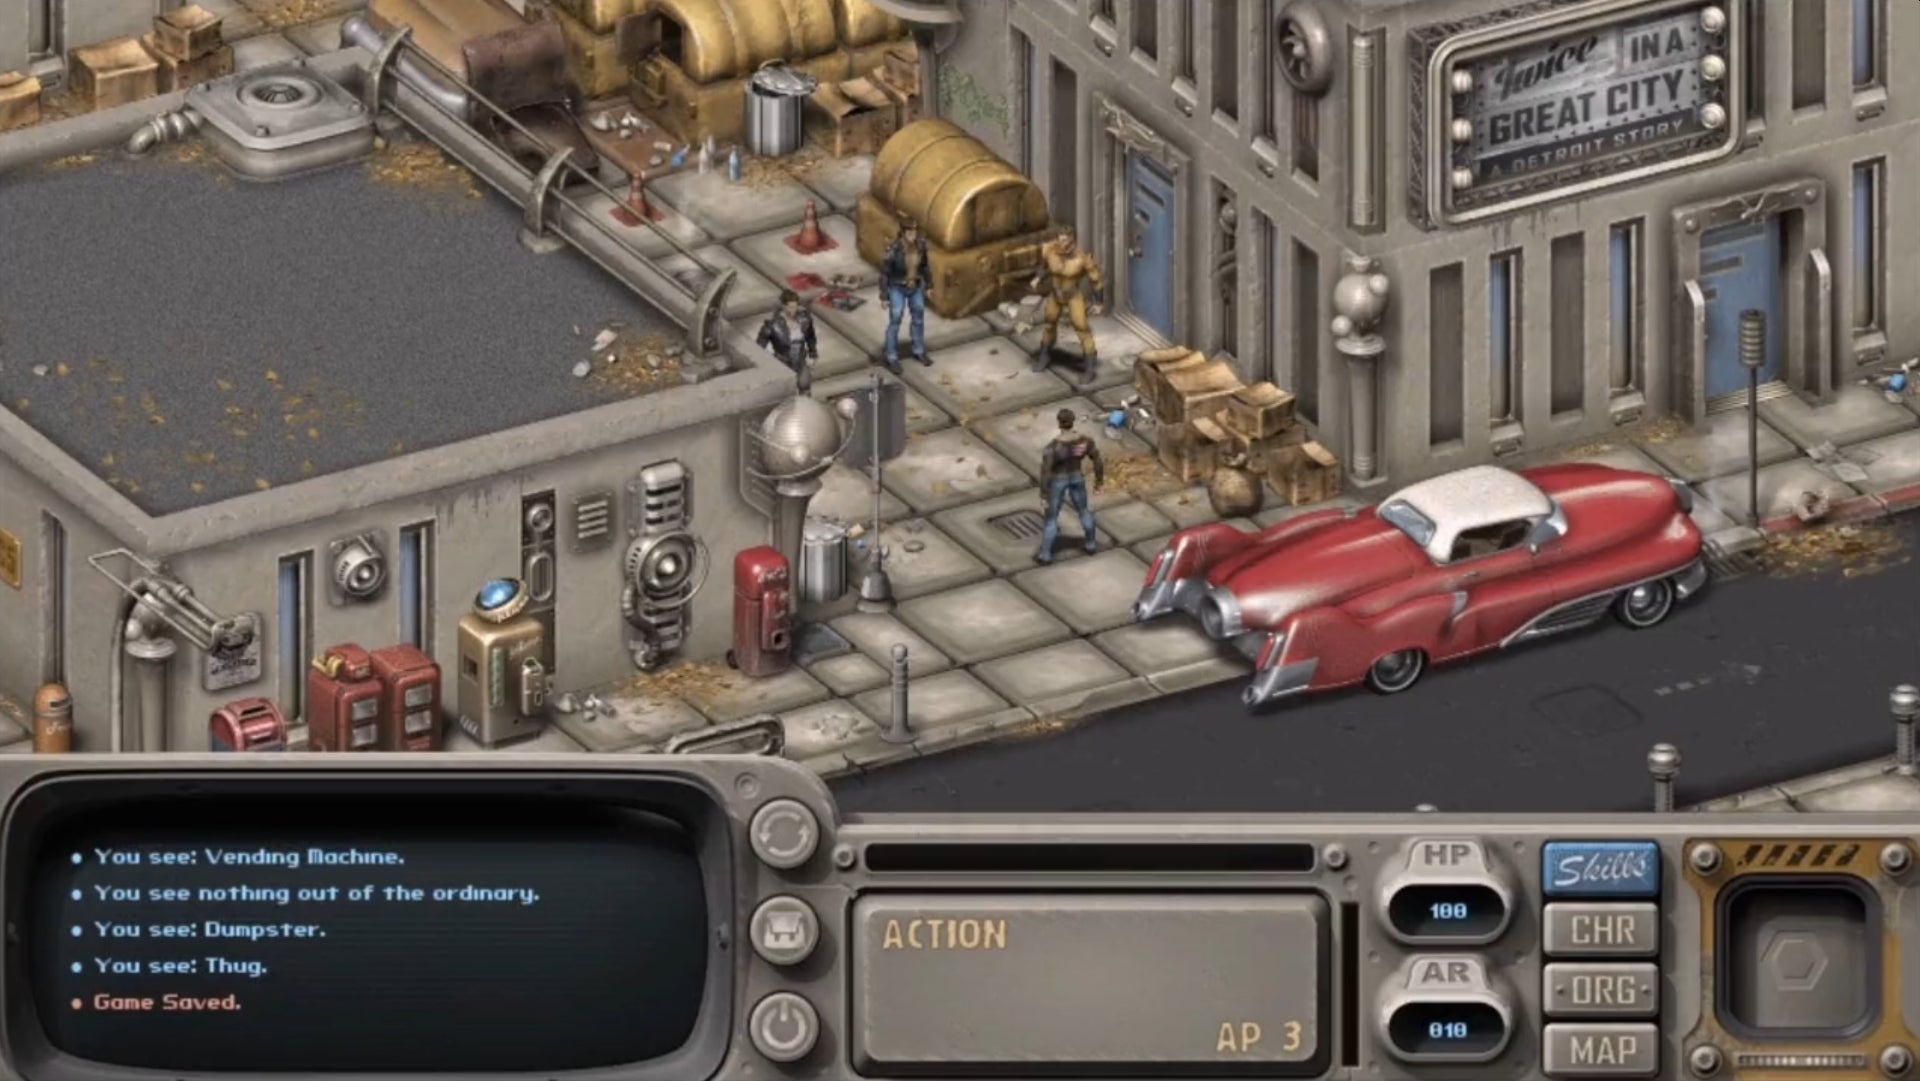 An image from a video of New Blood Interactive's CRPG, which is heavily inspired by Fallout and looks it.